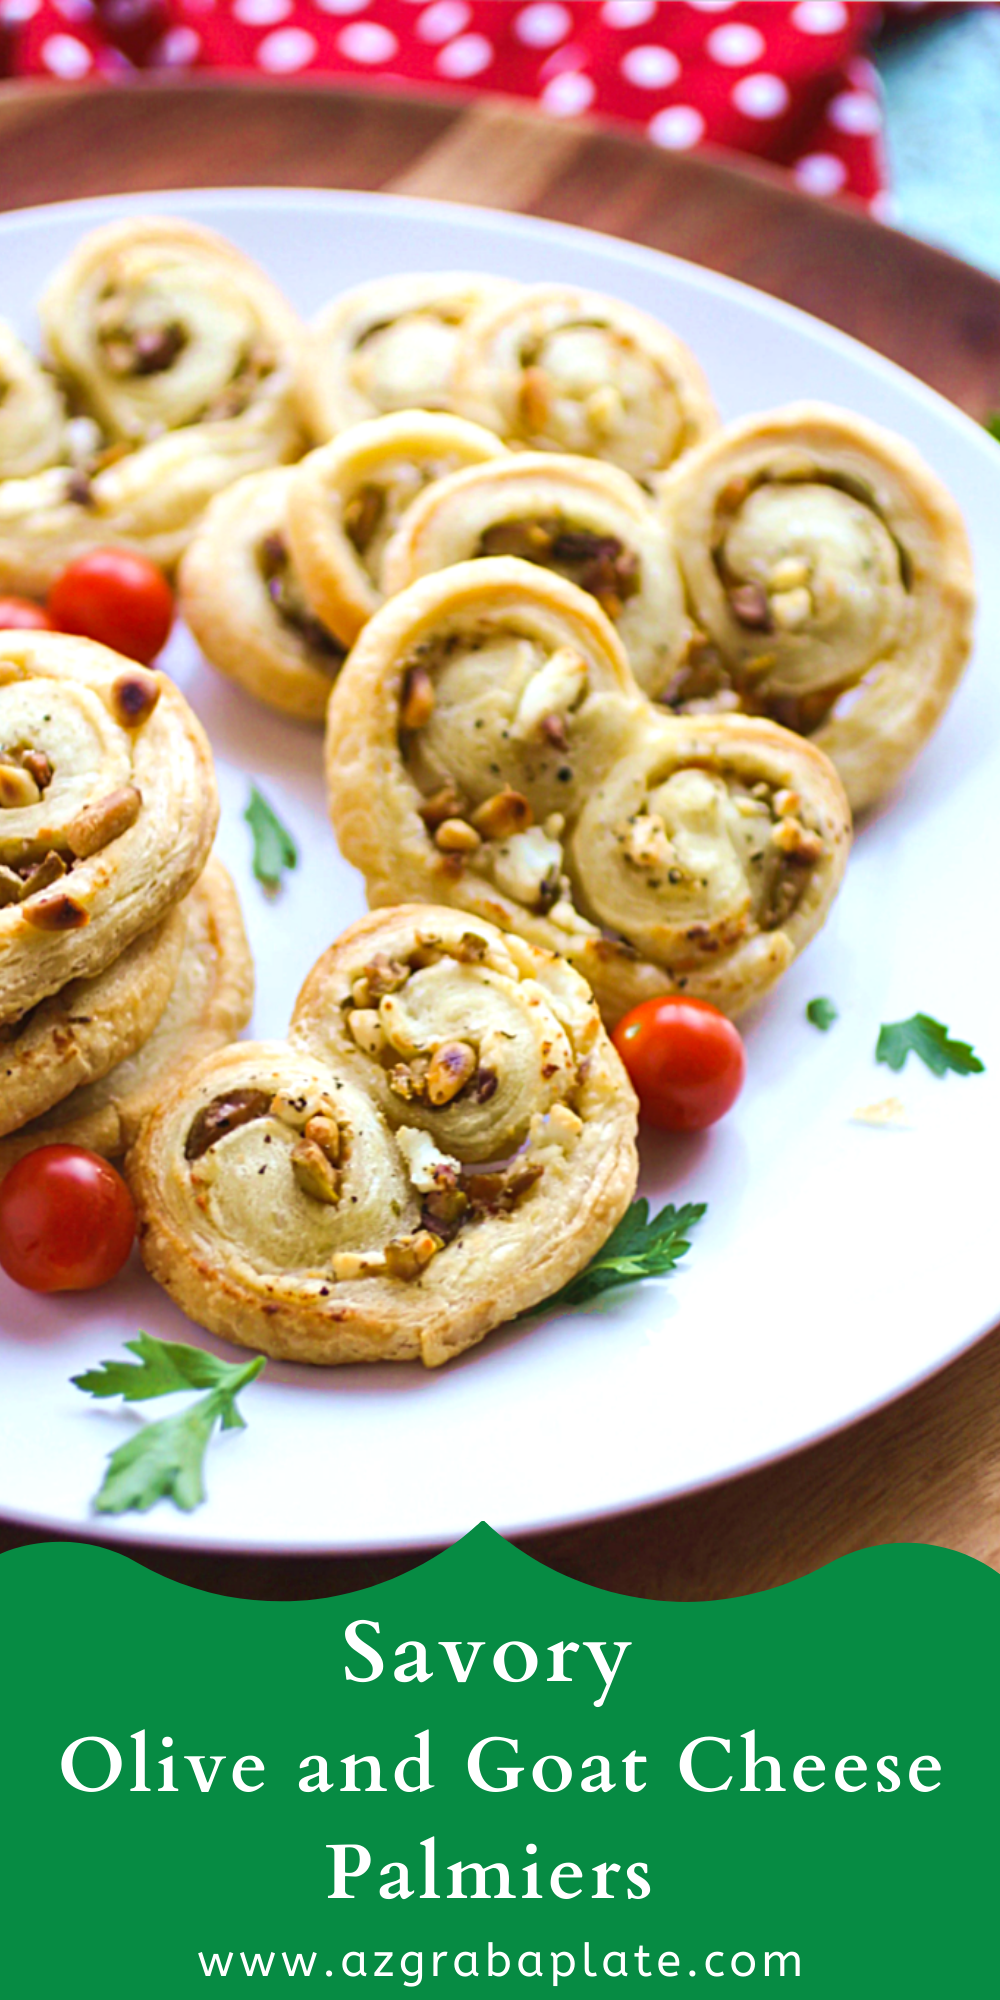 Savory Olive and Goat Cheese Palmiers are an amazingly delightful snack for a small or large gathering!